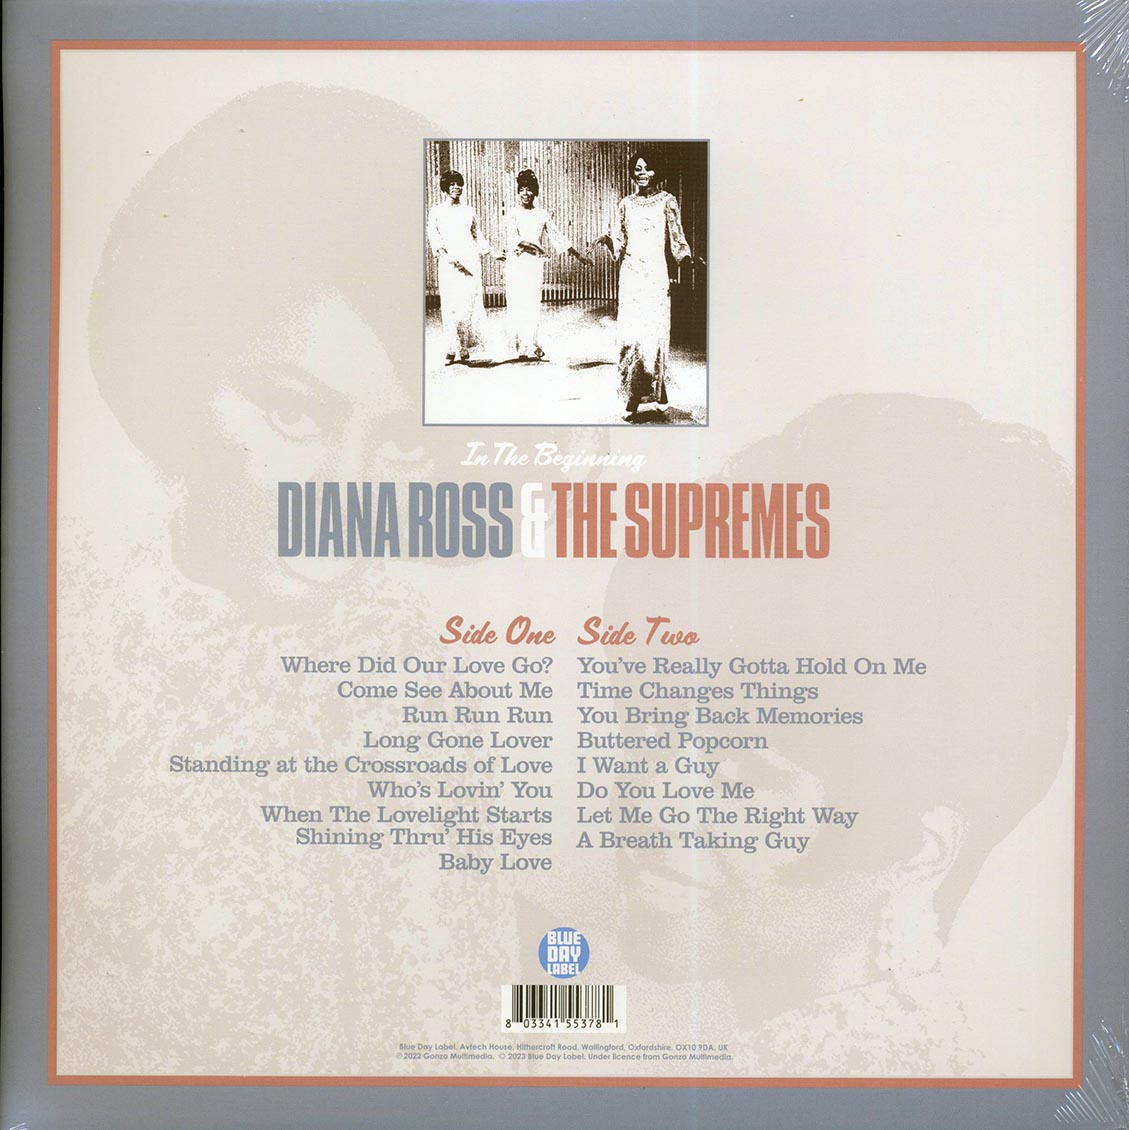 Diana Ross & The Supremes - In The Beginning - Vinyl LP, LP